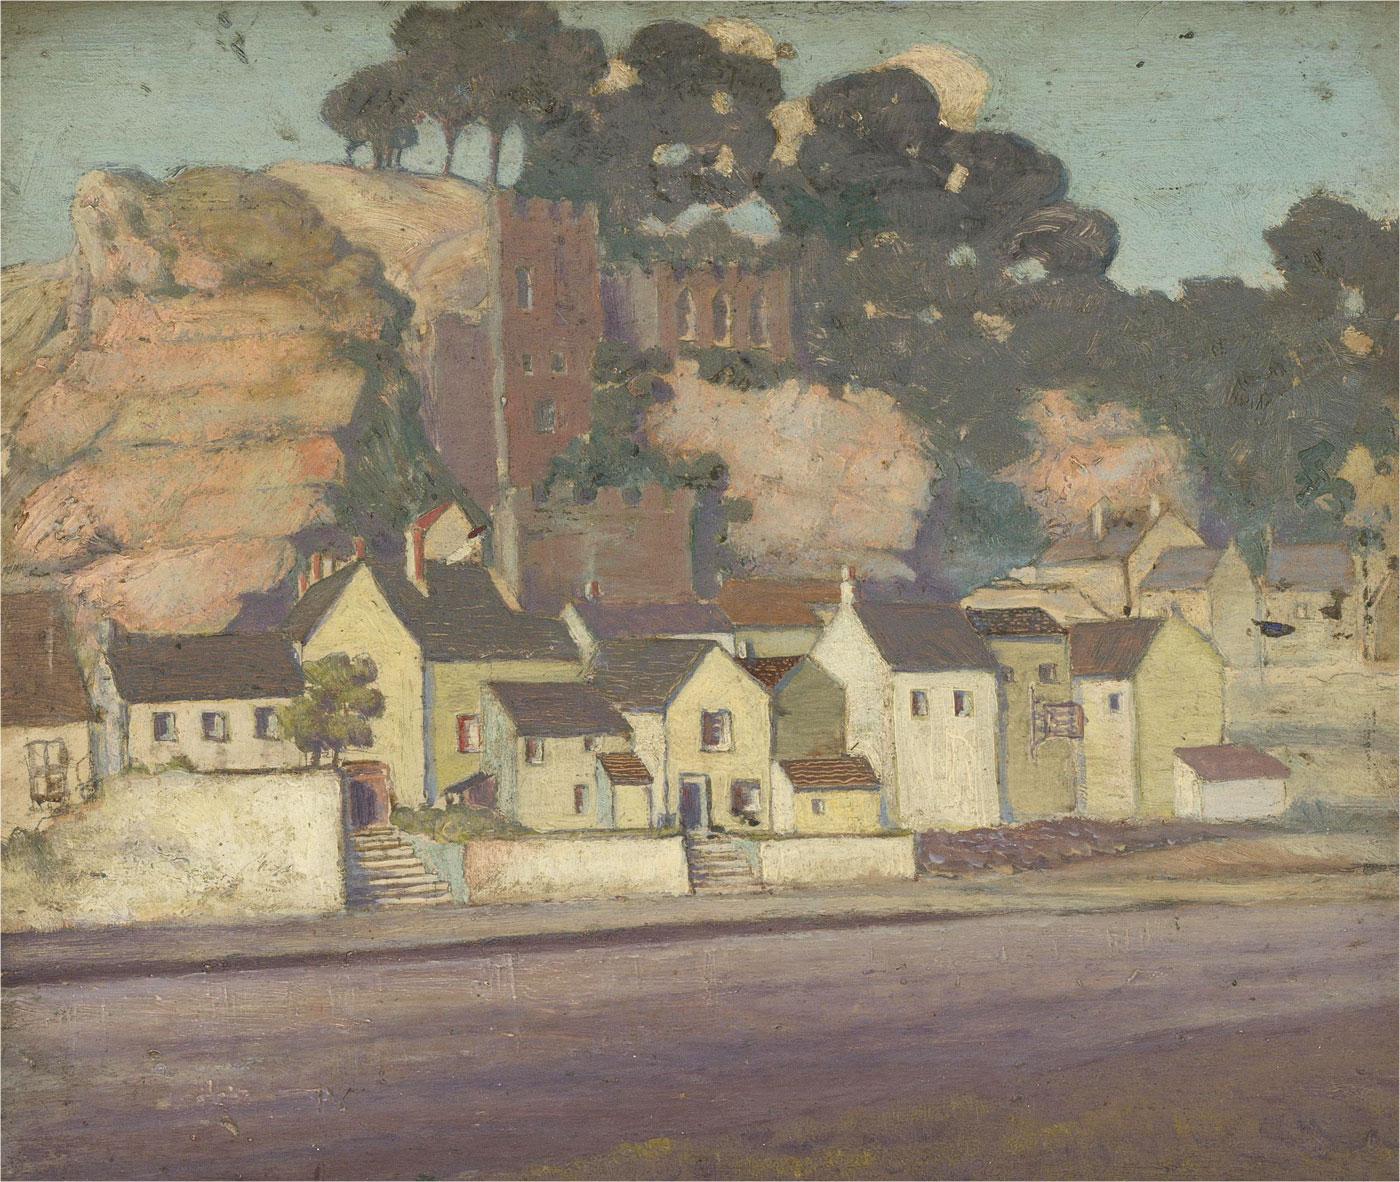 A very fine study in the style of Adrian Allinson (1890-1959), depicting little cottages on the edge of a canal with a ruined castle hovering above, clinging to the hillside. Well presented in a thick wood frame with gilt detail. Unsigned. On panel.
